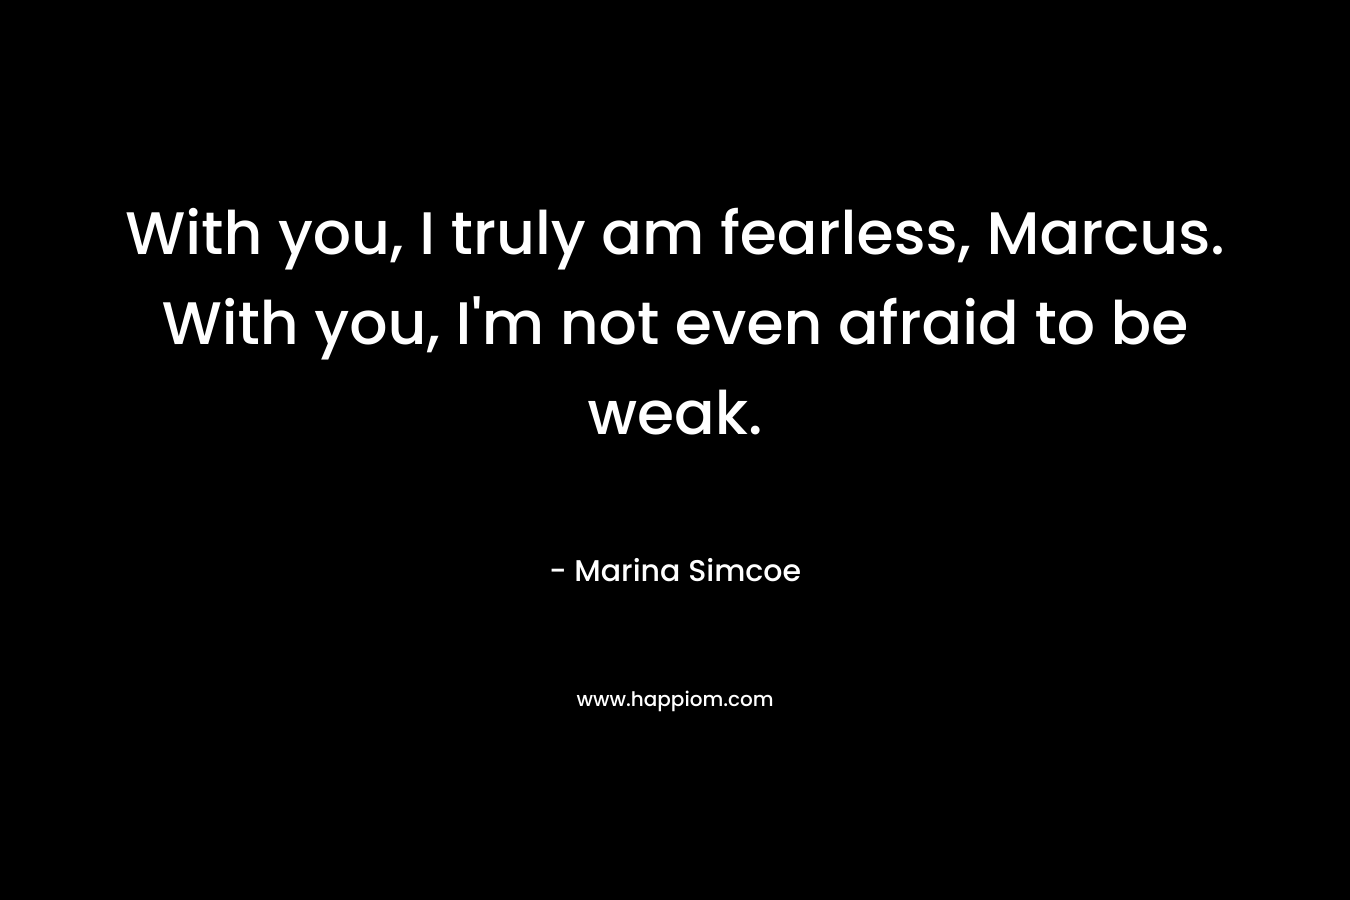 With you, I truly am fearless, Marcus. With you, I'm not even afraid to be weak.